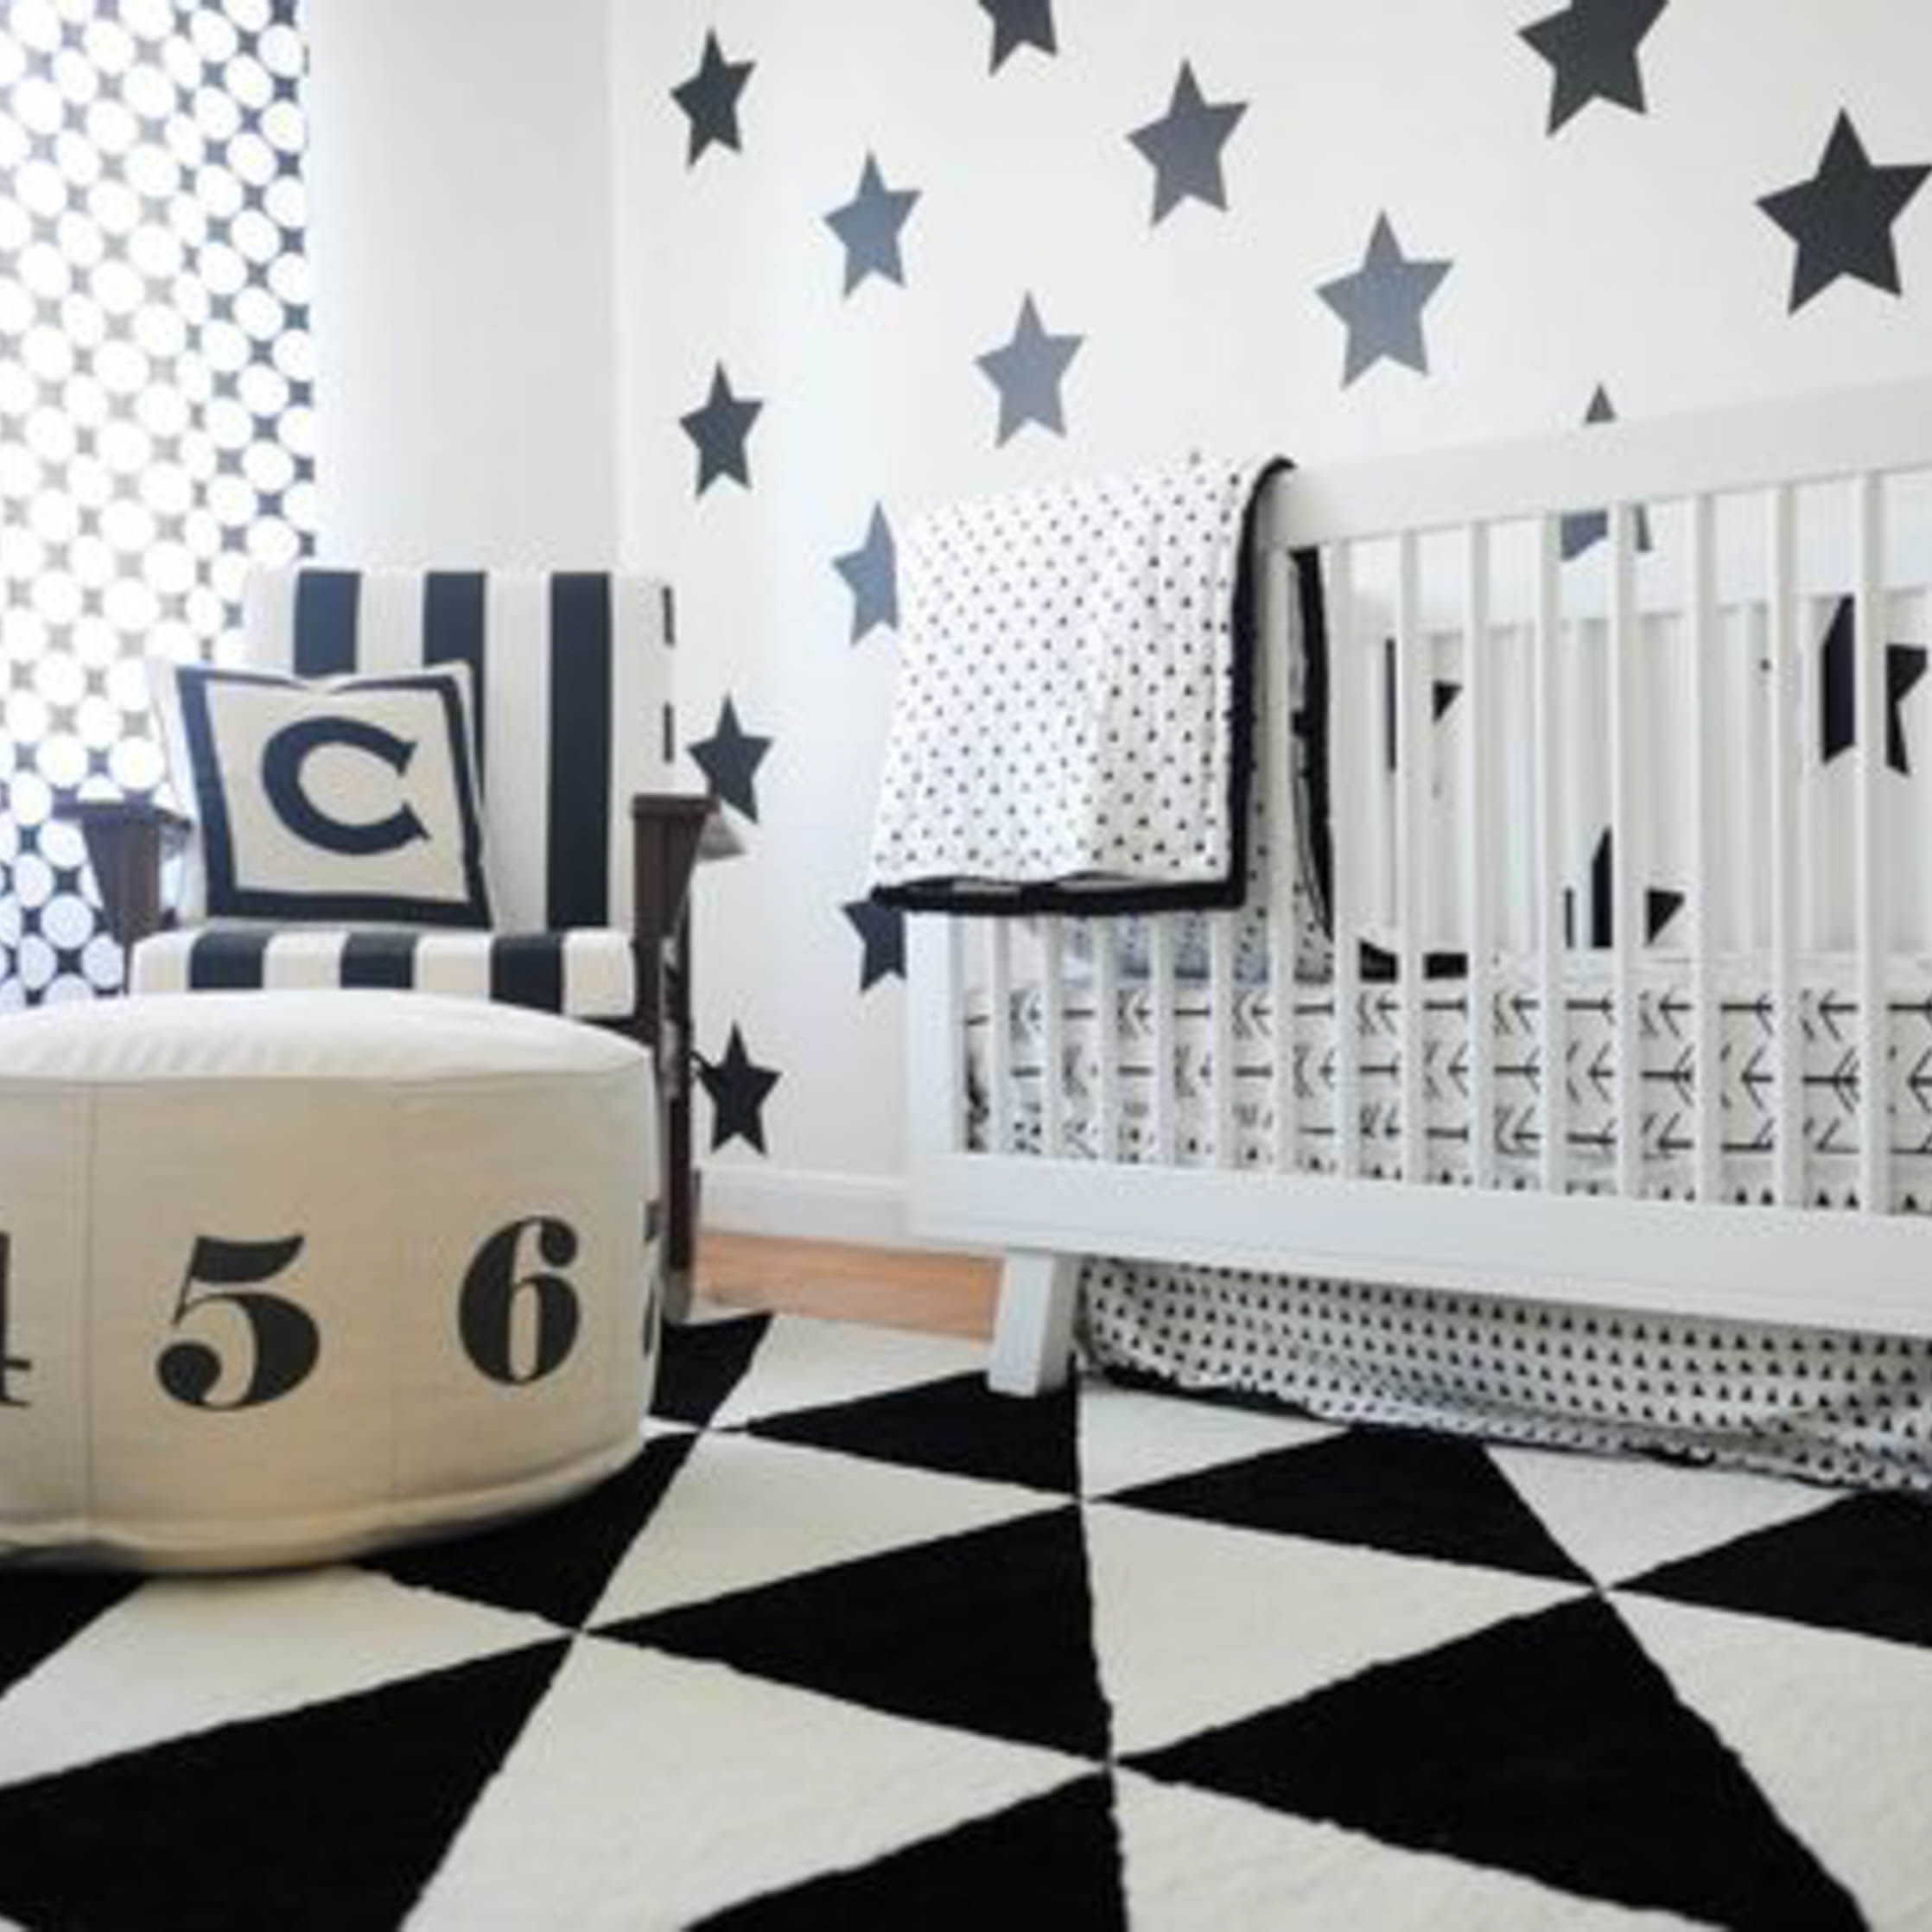 30 Black and White Looks for a Monochrome Design